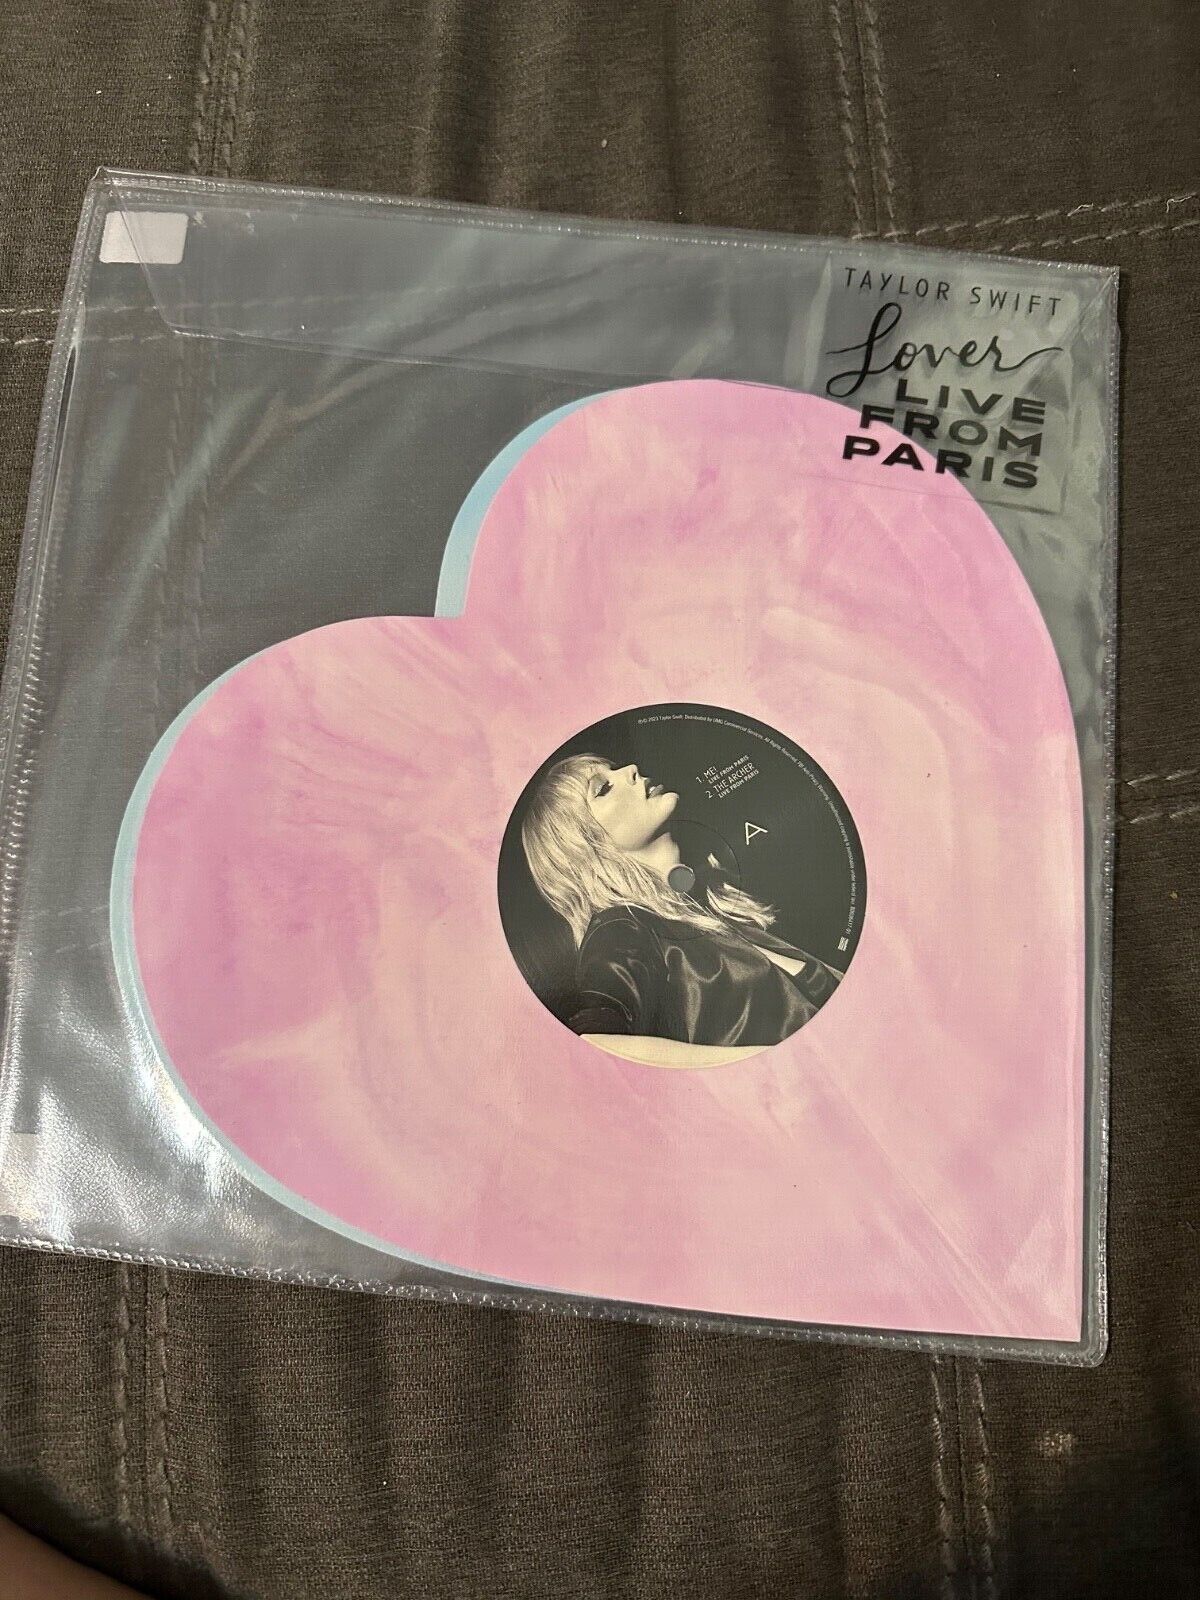 Lover (Live in Paris) 💕Taylor Swift 💖Heart Shaped Vinyl 💖 2 LP 💖NEW IN  STOCK